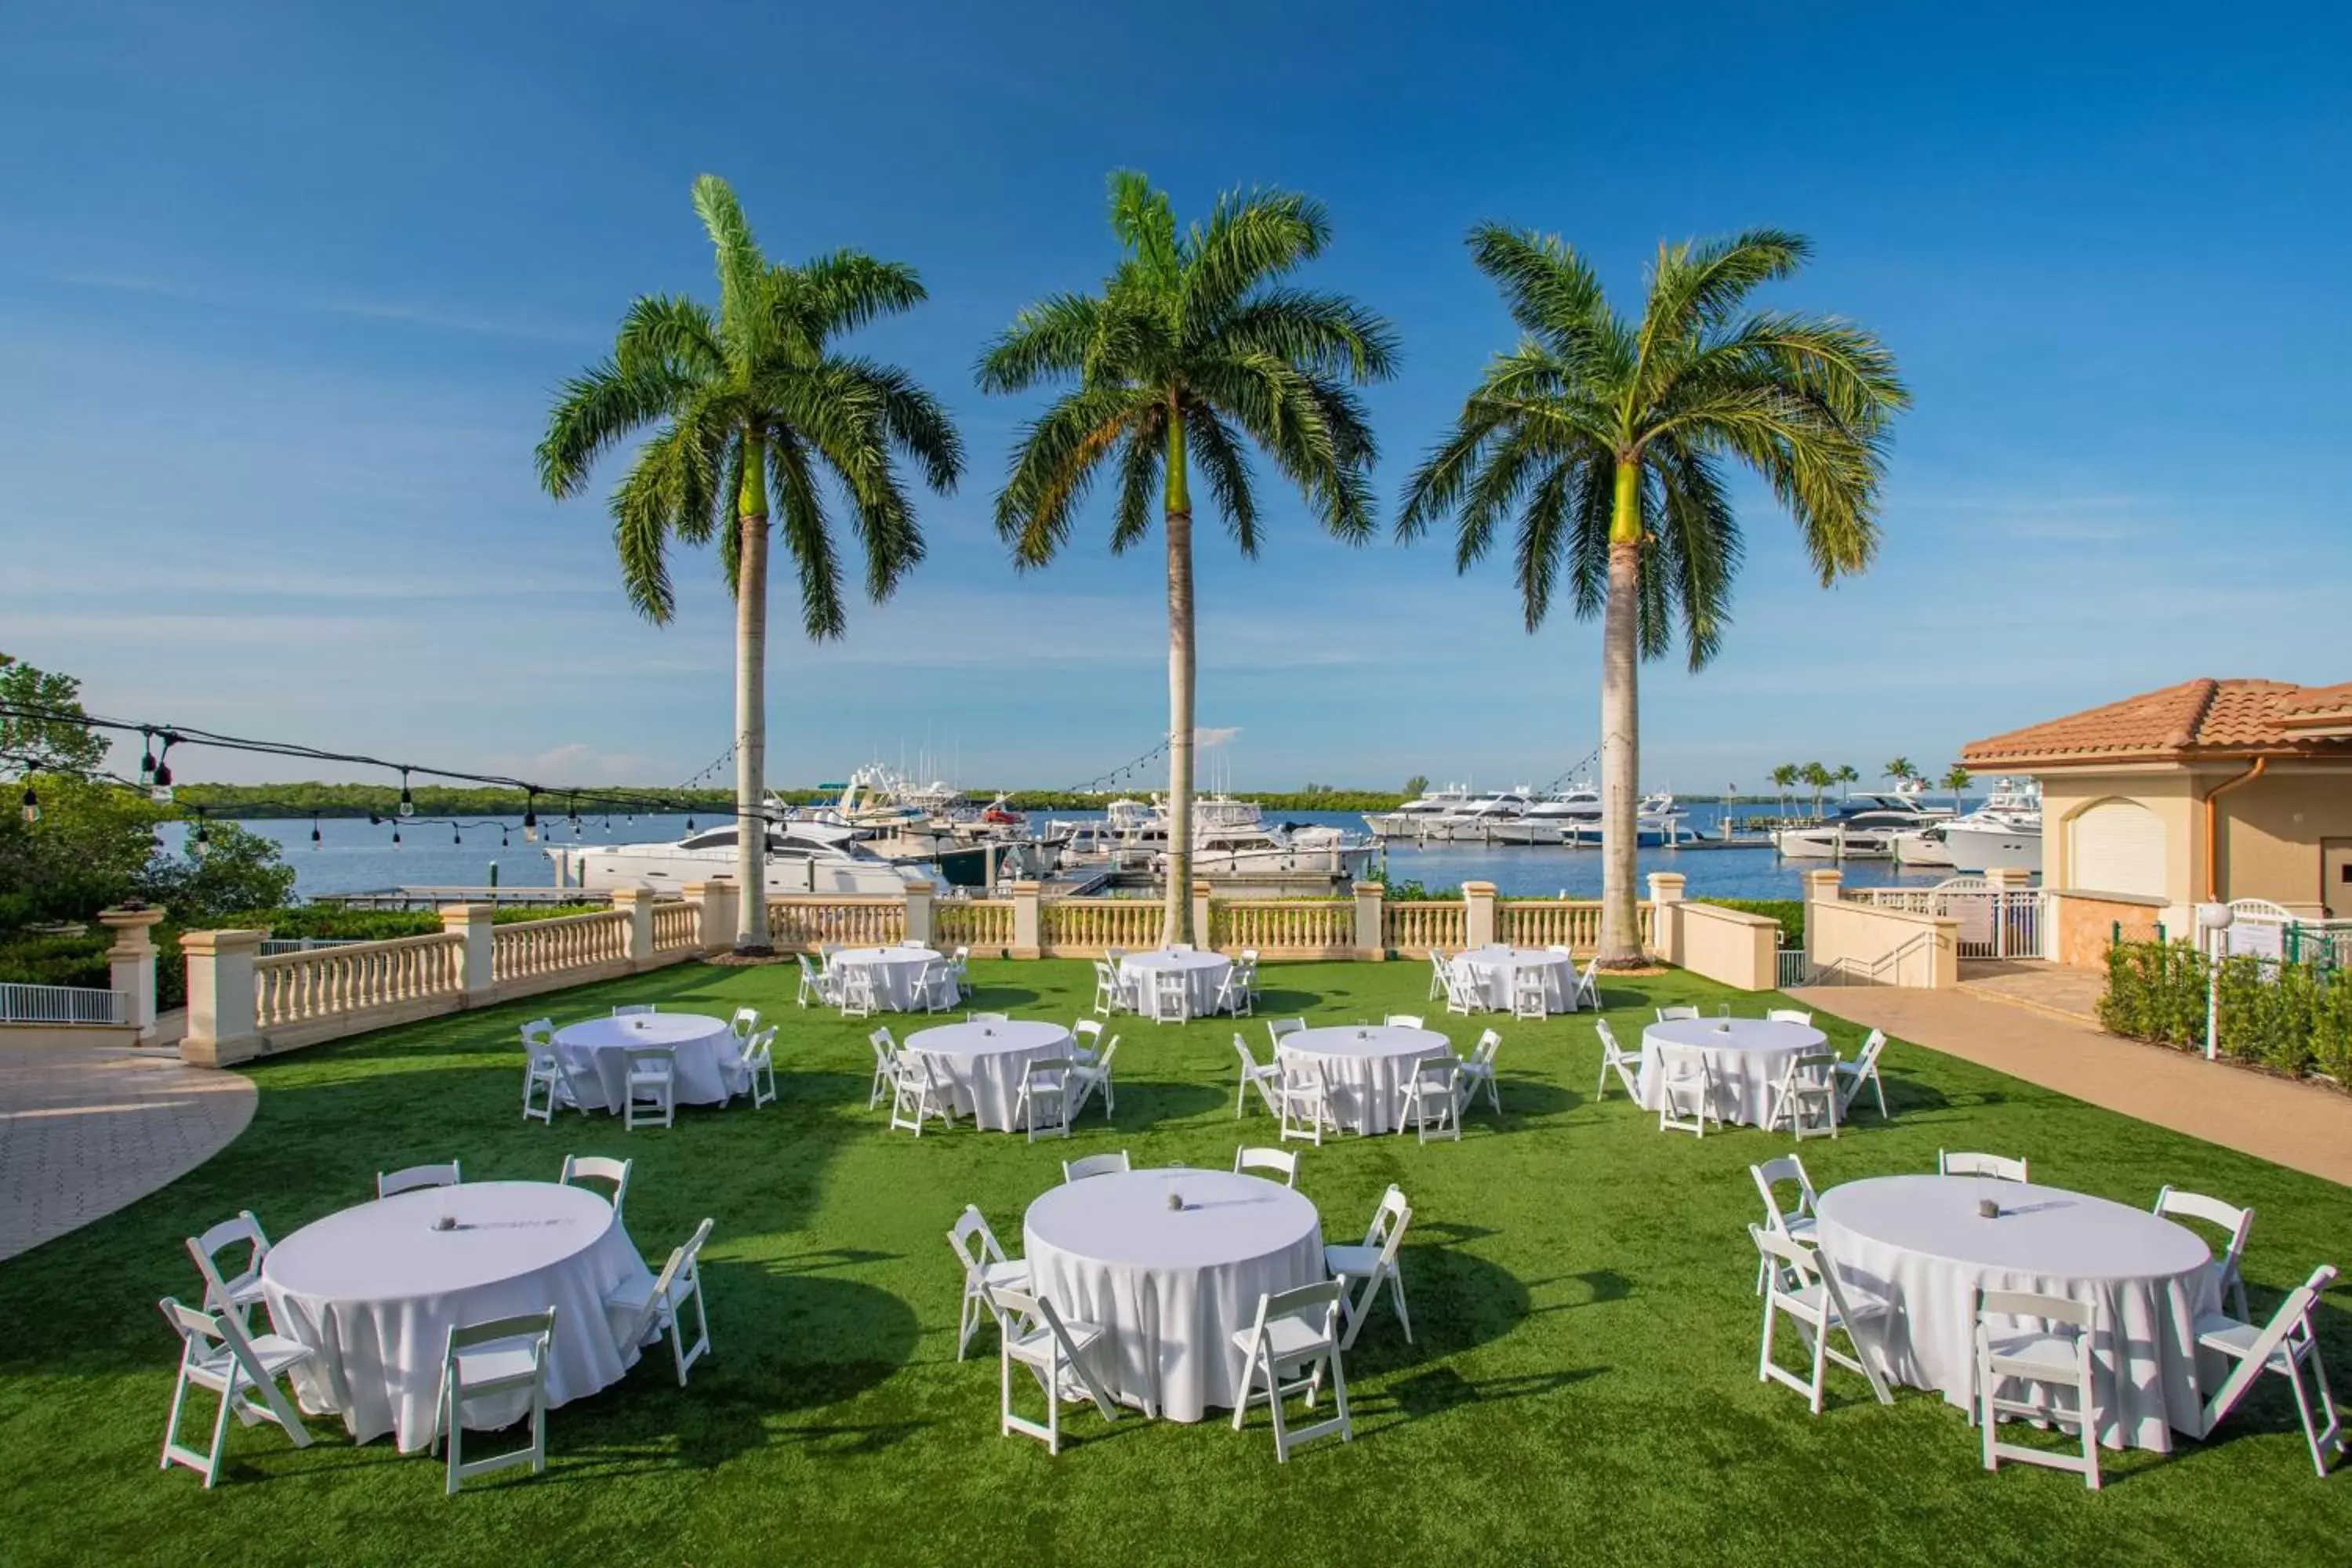 Other, Banquet Facilities in The Westin Cape Coral Resort at Marina Village